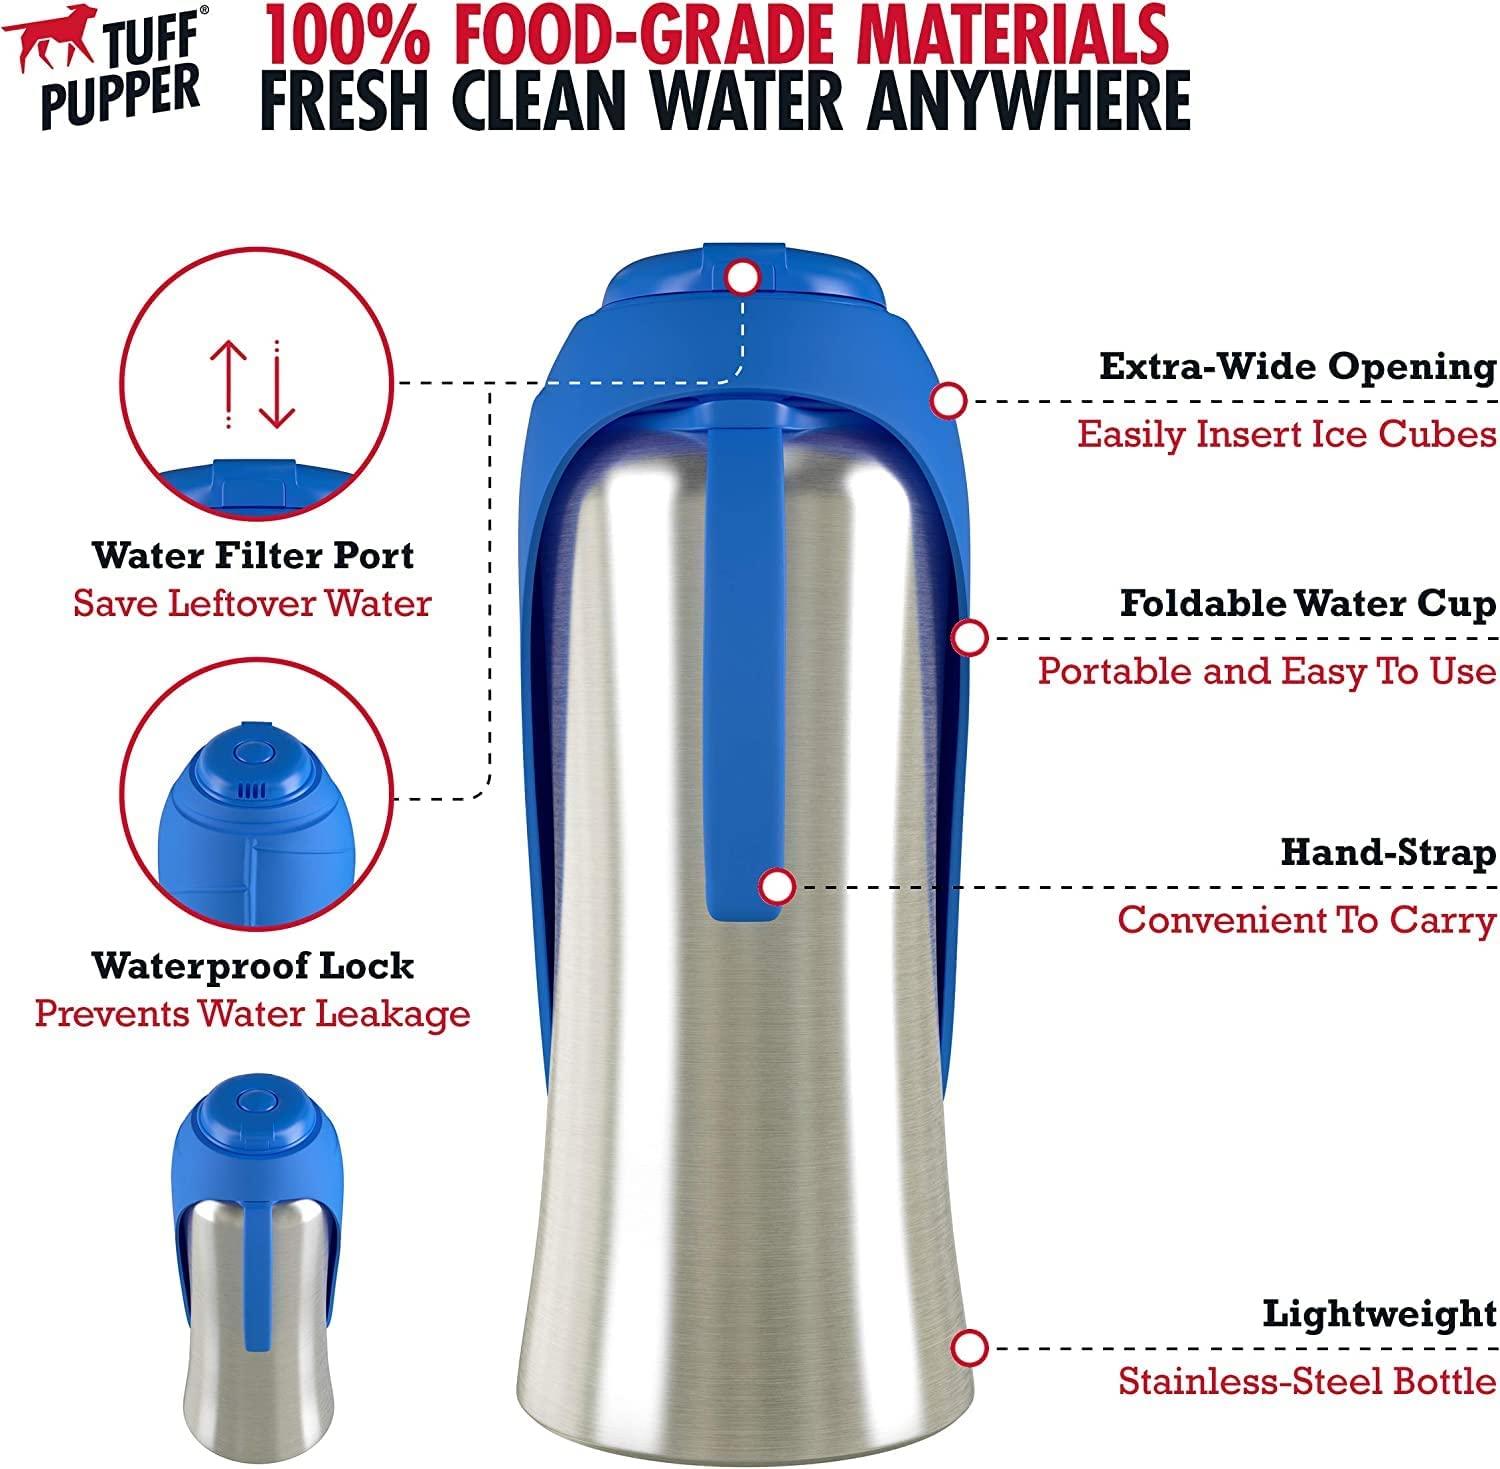 Pet Supplies : Tuff Pupper 100 oz Heavy Duty Insulated Stainless